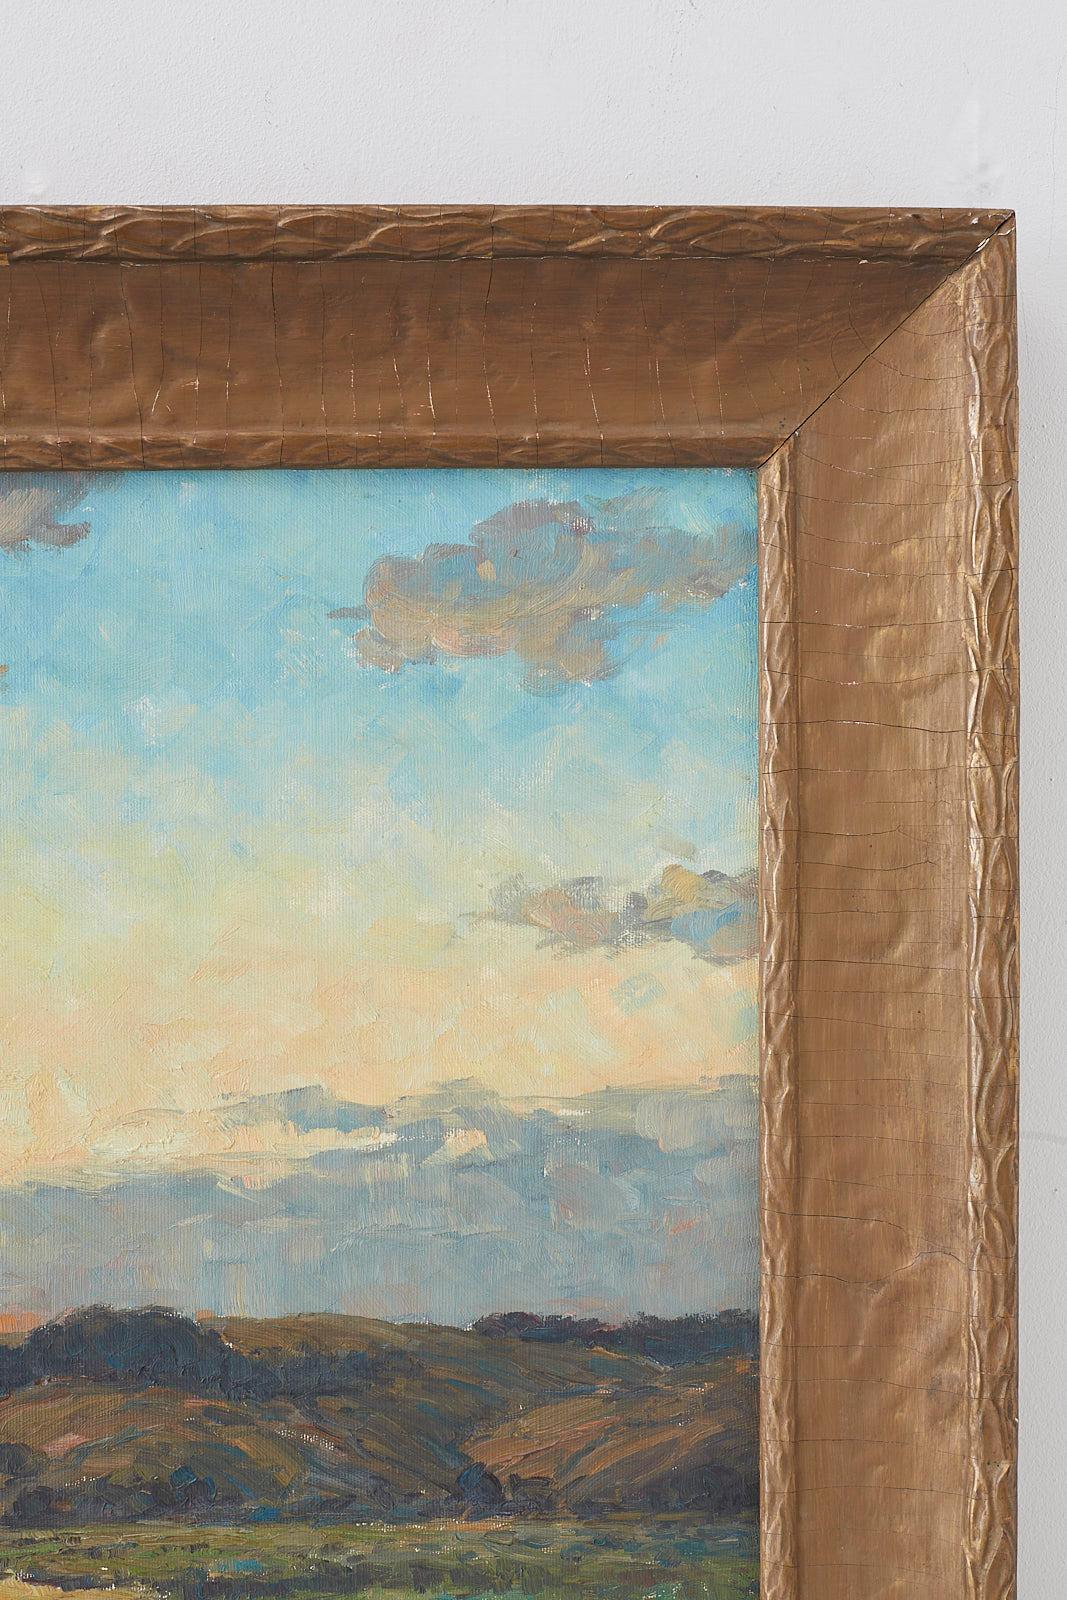 Early oil on canvas painting by Winfield Scott Clime (American 1881-1958) 30 inches wide by 25 inches high. Sublime landscape painting of a sunrise set in a gilt wood and gesso frame with a distressed and faded patina. Signed and dated 1912 on